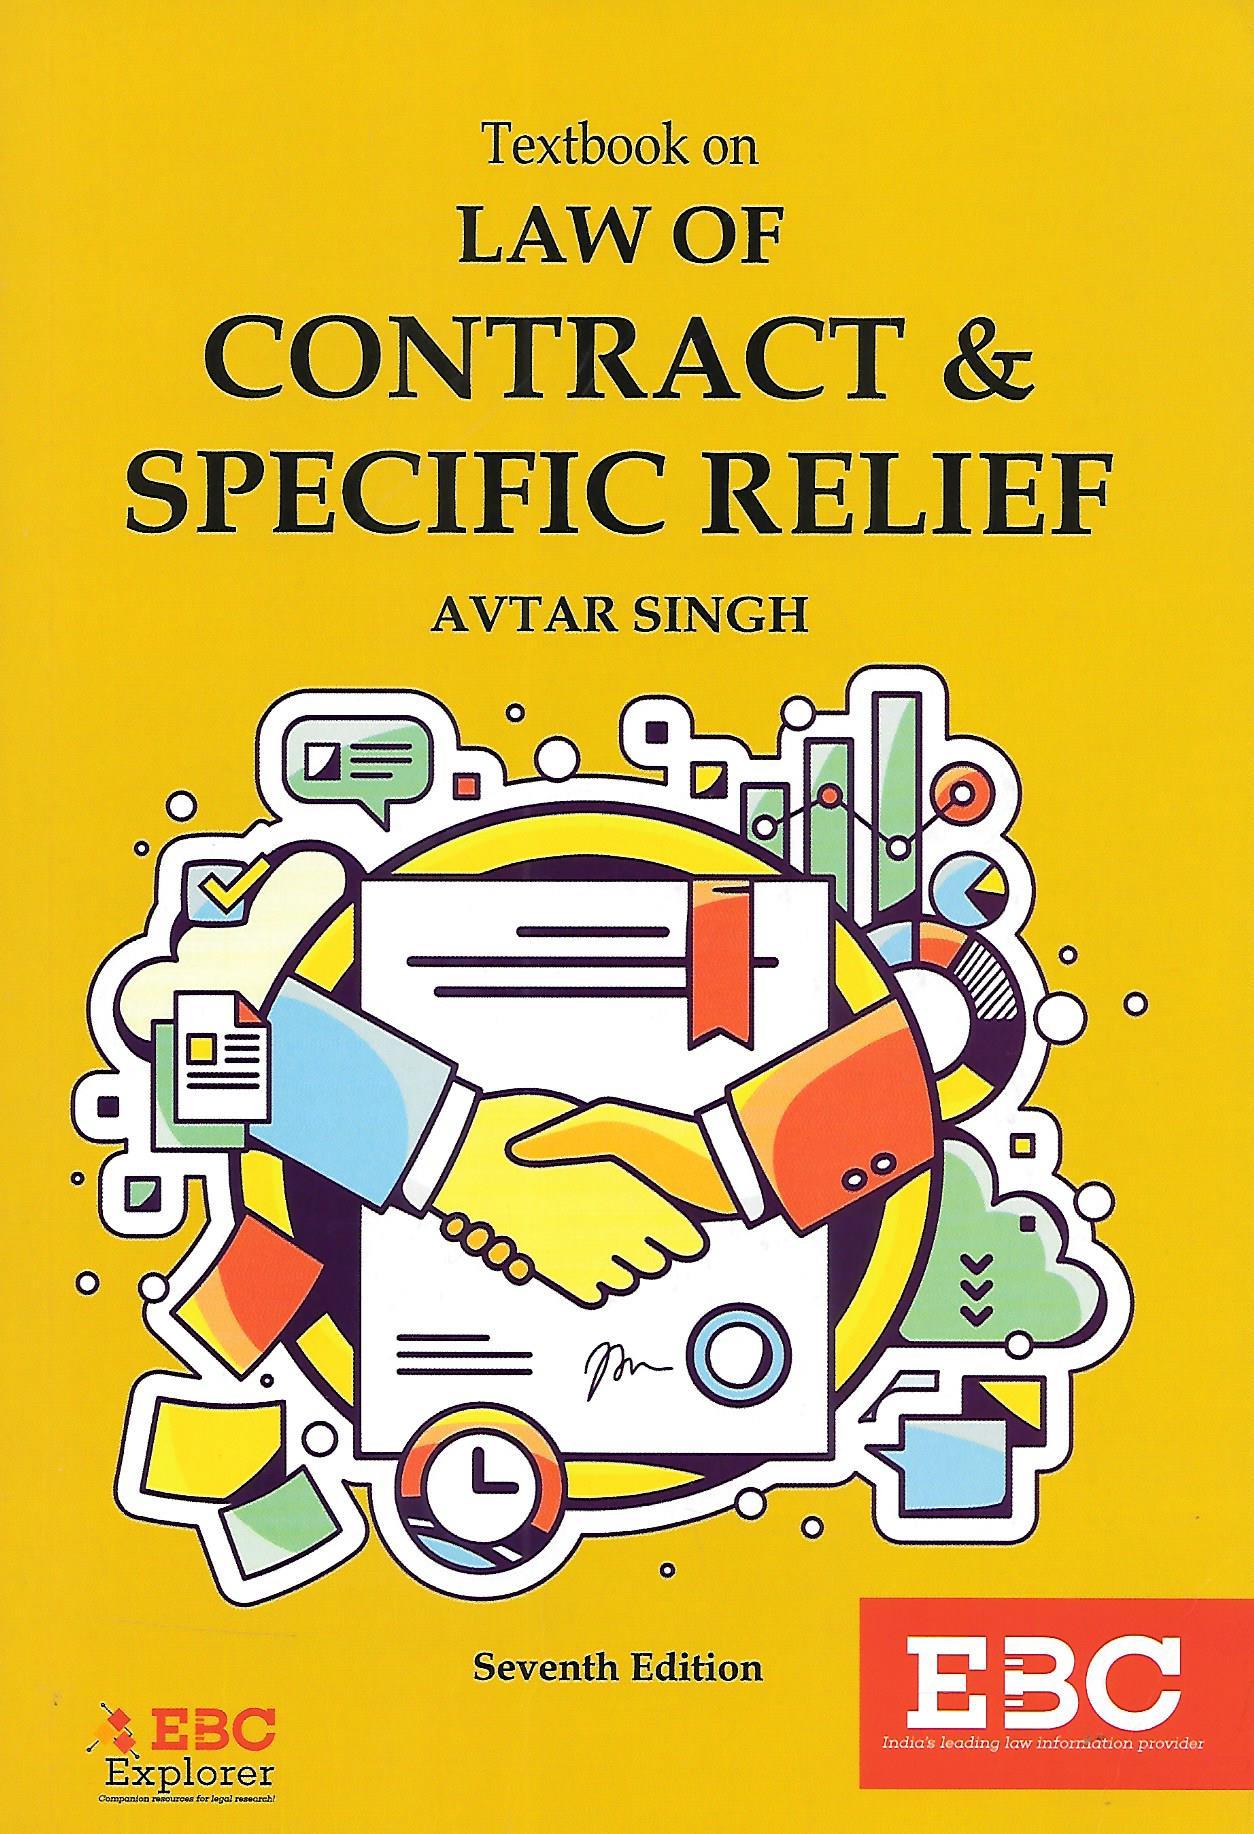 Textbook on Law of Contract and Specfic Relief - M&J Services